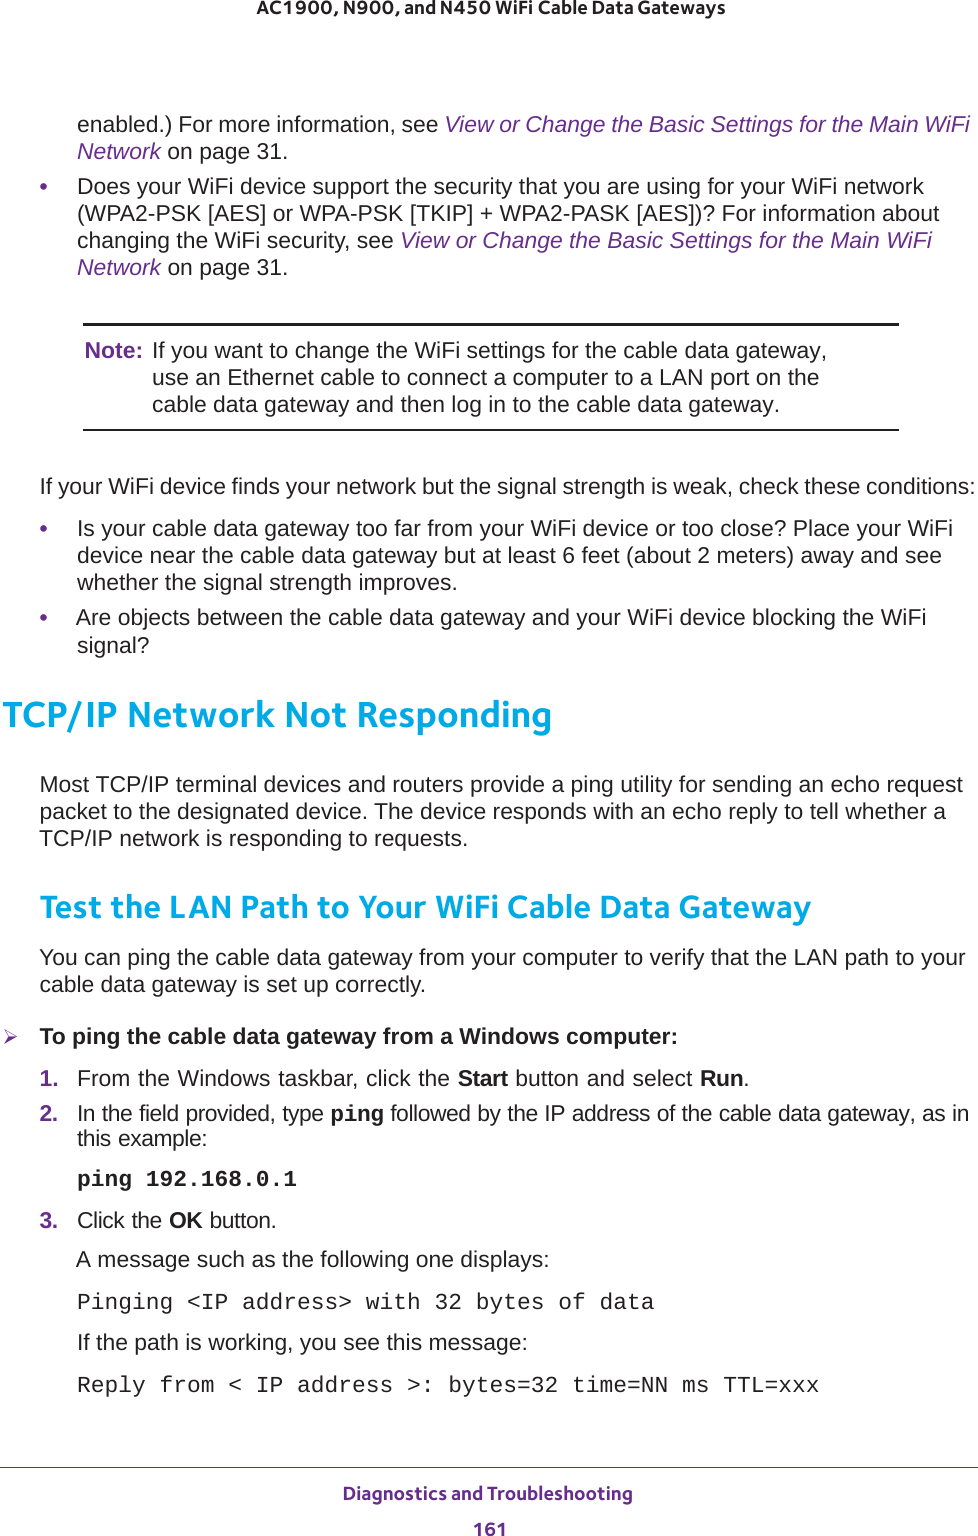 Diagnostics and Troubleshooting 161 AC1900, N900, and N450 WiFi Cable Data Gatewaysenabled.) For more information, see View or Change the Basic Settings for the Main WiFi Network on page  31.•Does your WiFi device support the security that you are using for your WiFi network (WPA2-PSK [AES] or WPA-PSK [TKIP] + WPA2-PASK [AES])? For information about changing the WiFi security, see View or Change the Basic Settings for the Main WiFi Network on page  31.Note: If you want to change the WiFi settings for the cable data gateway, use an Ethernet cable to connect a computer to a LAN port on the cable data gateway and then log in to the cable data gateway.If your WiFi device finds your network but the signal strength is weak, check these conditions:•Is your cable data gateway too far from your WiFi device or too close? Place your WiFi device near the cable data gateway but at least 6 feet (about 2 meters) away and see whether the signal strength improves.•Are objects between the cable data gateway and your WiFi device blocking the WiFi signal?TCP/IP Network Not RespondingMost TCP/IP terminal devices and routers provide a ping utility for sending an echo request packet to the designated device. The device responds with an echo reply to tell whether a TCP/IP network is responding to requests.Test the LAN Path to Your WiFi Cable Data GatewayYou can ping the cable data gateway from your computer to verify that the LAN path to your cable data gateway is set up correctly.To ping the cable data gateway from a Windows computer:1.  From the Windows taskbar, click the Start button and select Run.2.  In the field provided, type ping followed by the IP address of the cable data gateway, as in this example:ping 192.168.0.13.  Click the OK button.A message such as the following one displays:Pinging &lt;IP address&gt; with 32 bytes of dataIf the path is working, you see this message:Reply from &lt; IP address &gt;: bytes=32 time=NN ms TTL=xxx